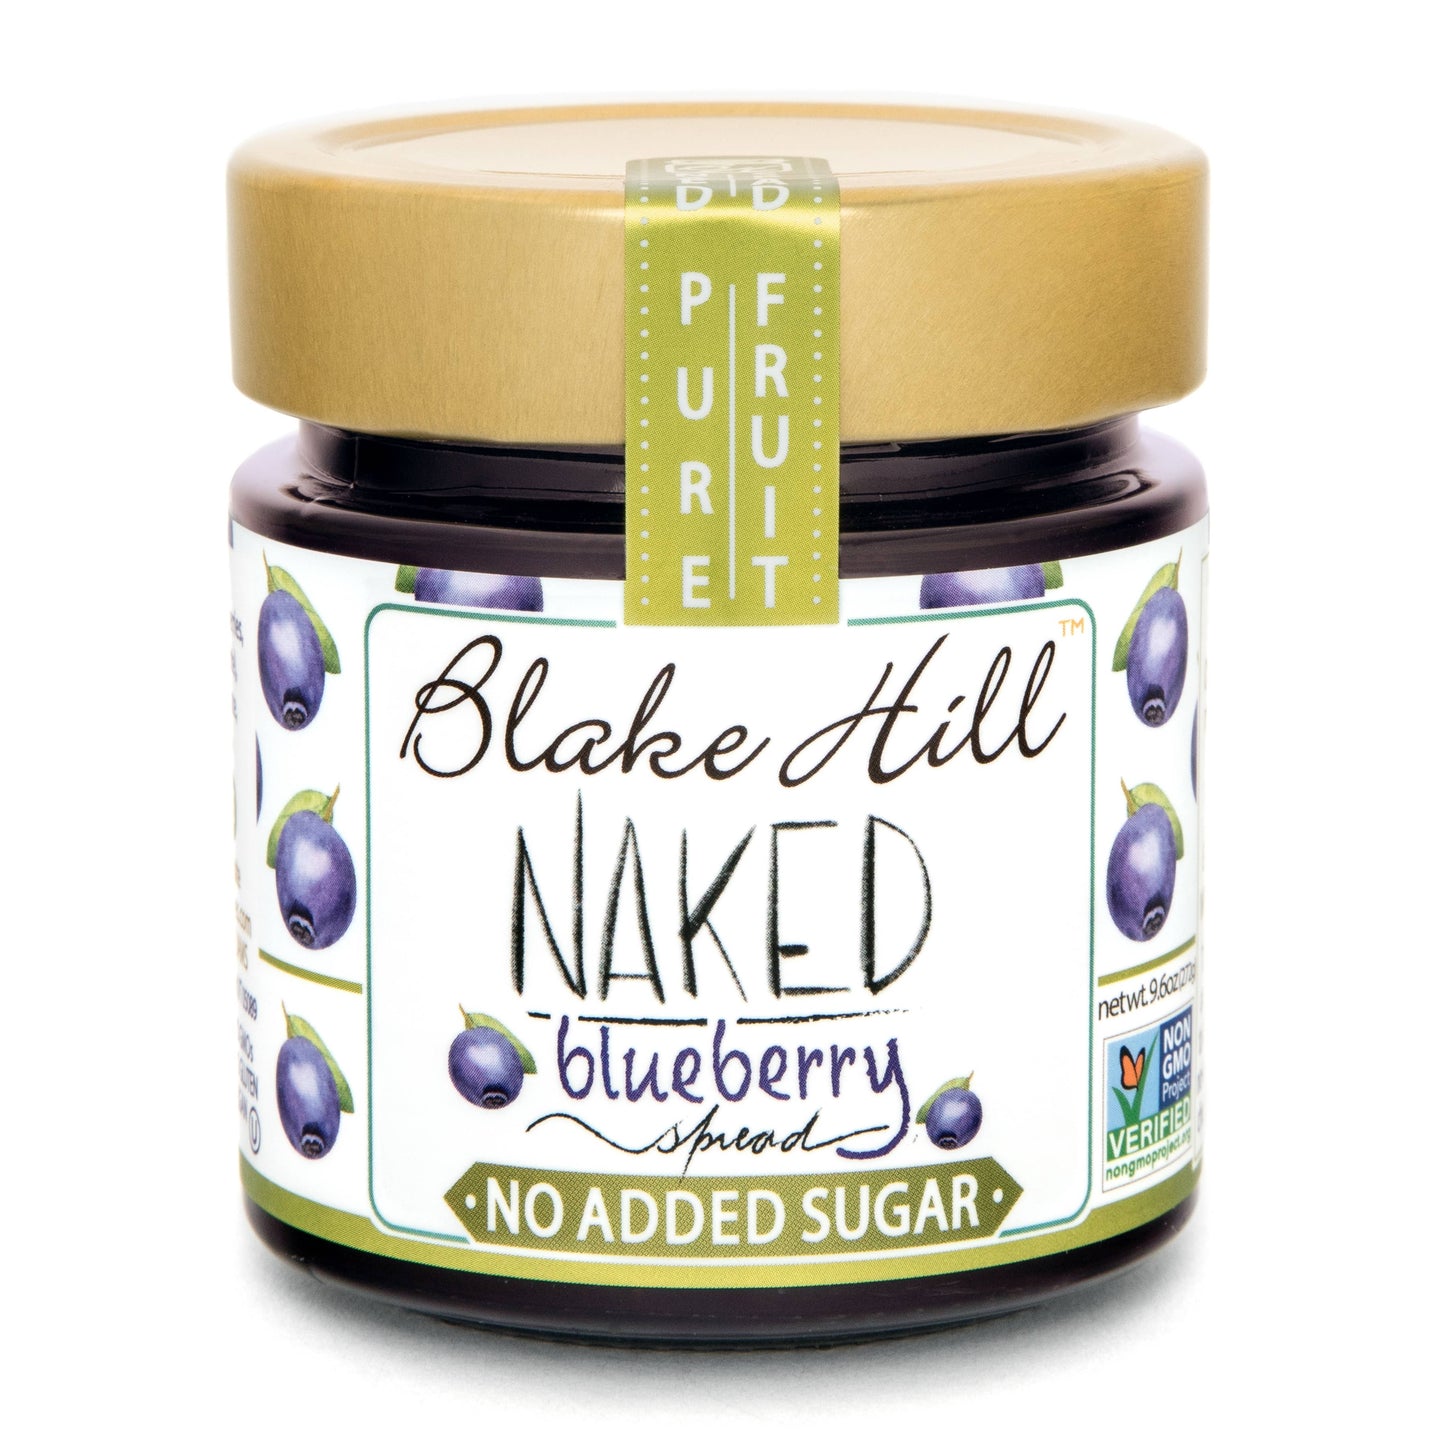 Naked Blueberry Spread - No Added Sugar